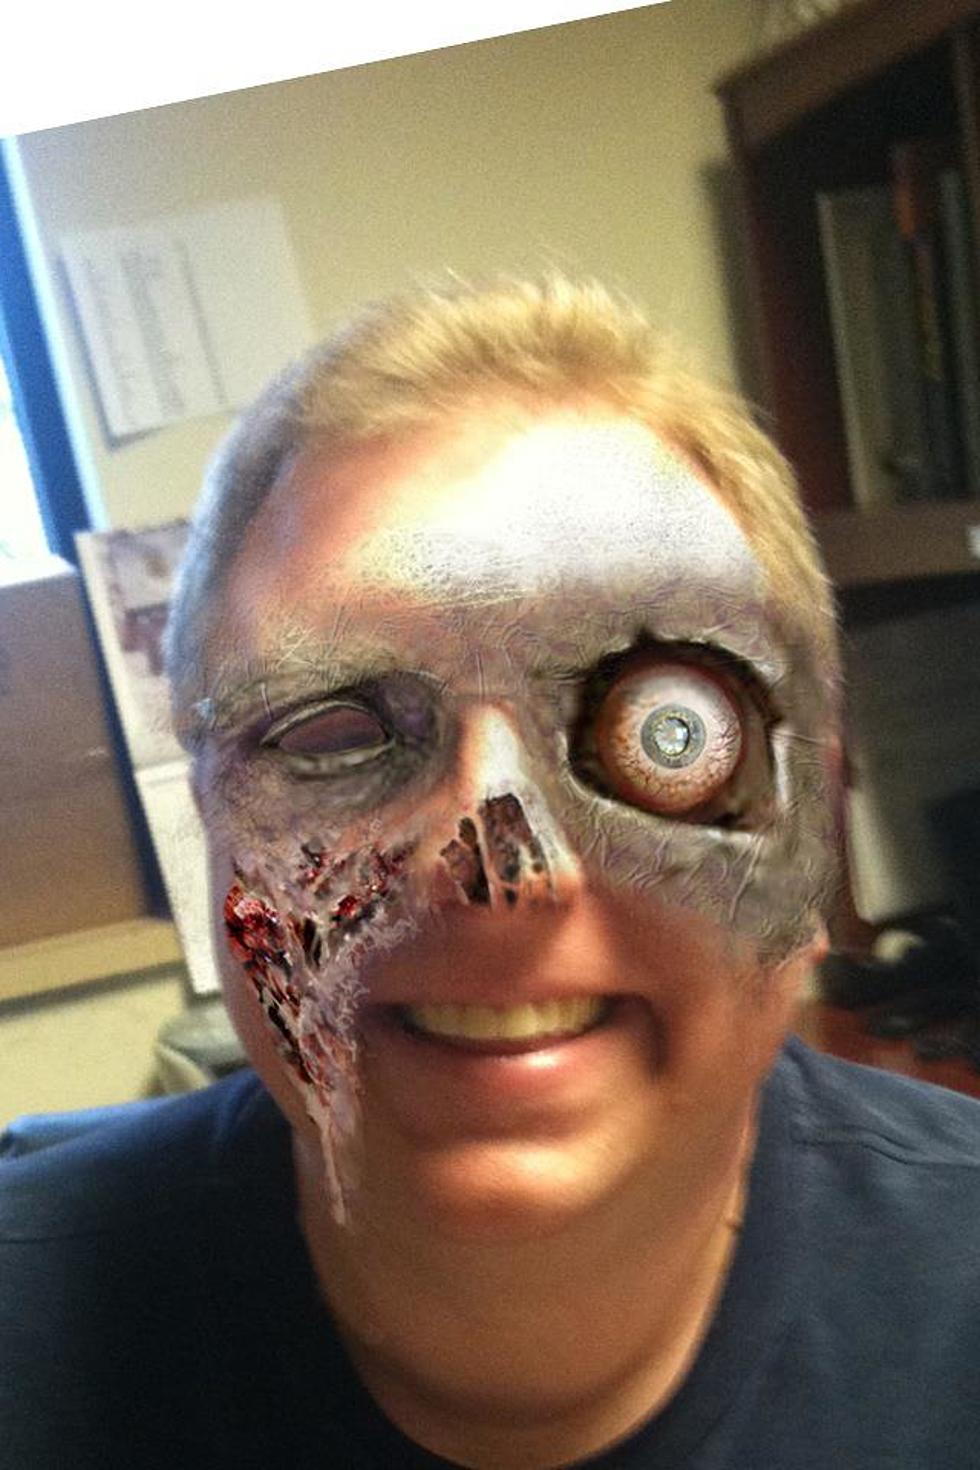 Instant Walking Dead – Turn Yourself Into a Zombie with the iMut8r App